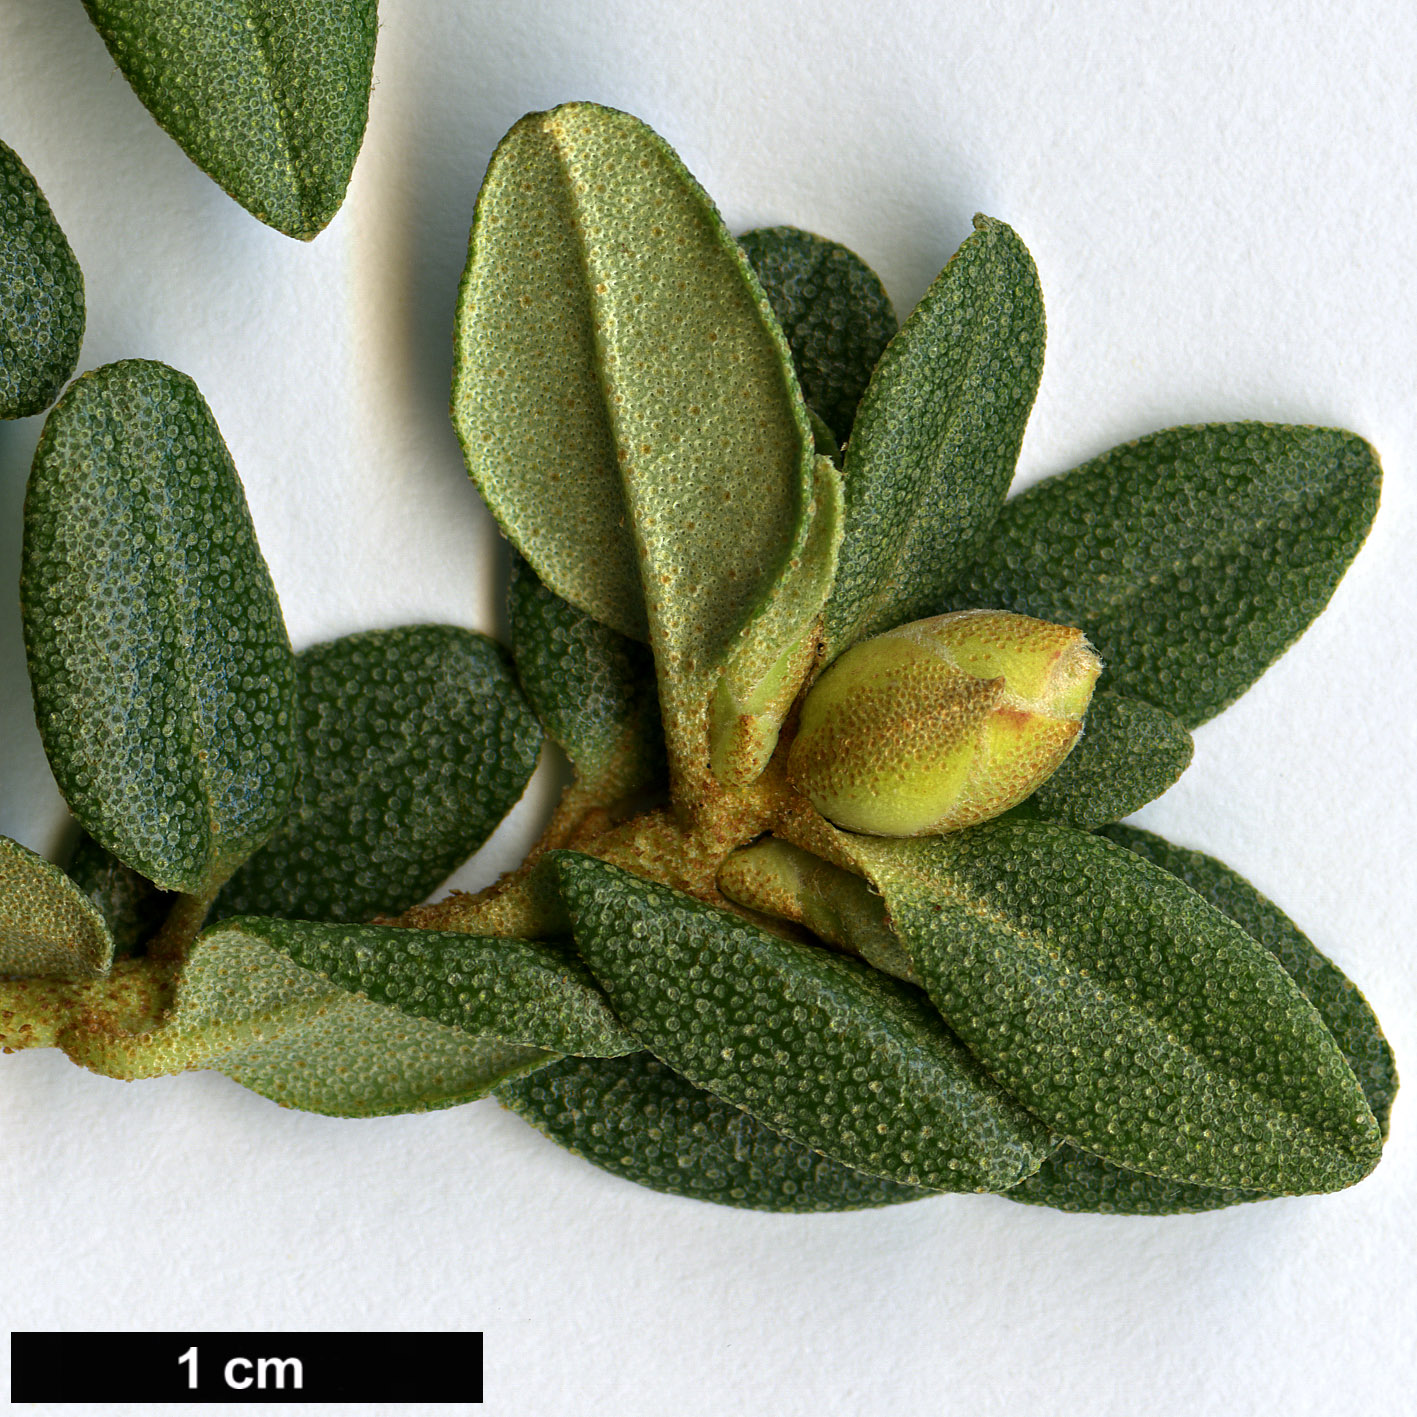 High resolution image: Family: Ericaceae - Genus: Rhododendron - Taxon: aff. tsaii 